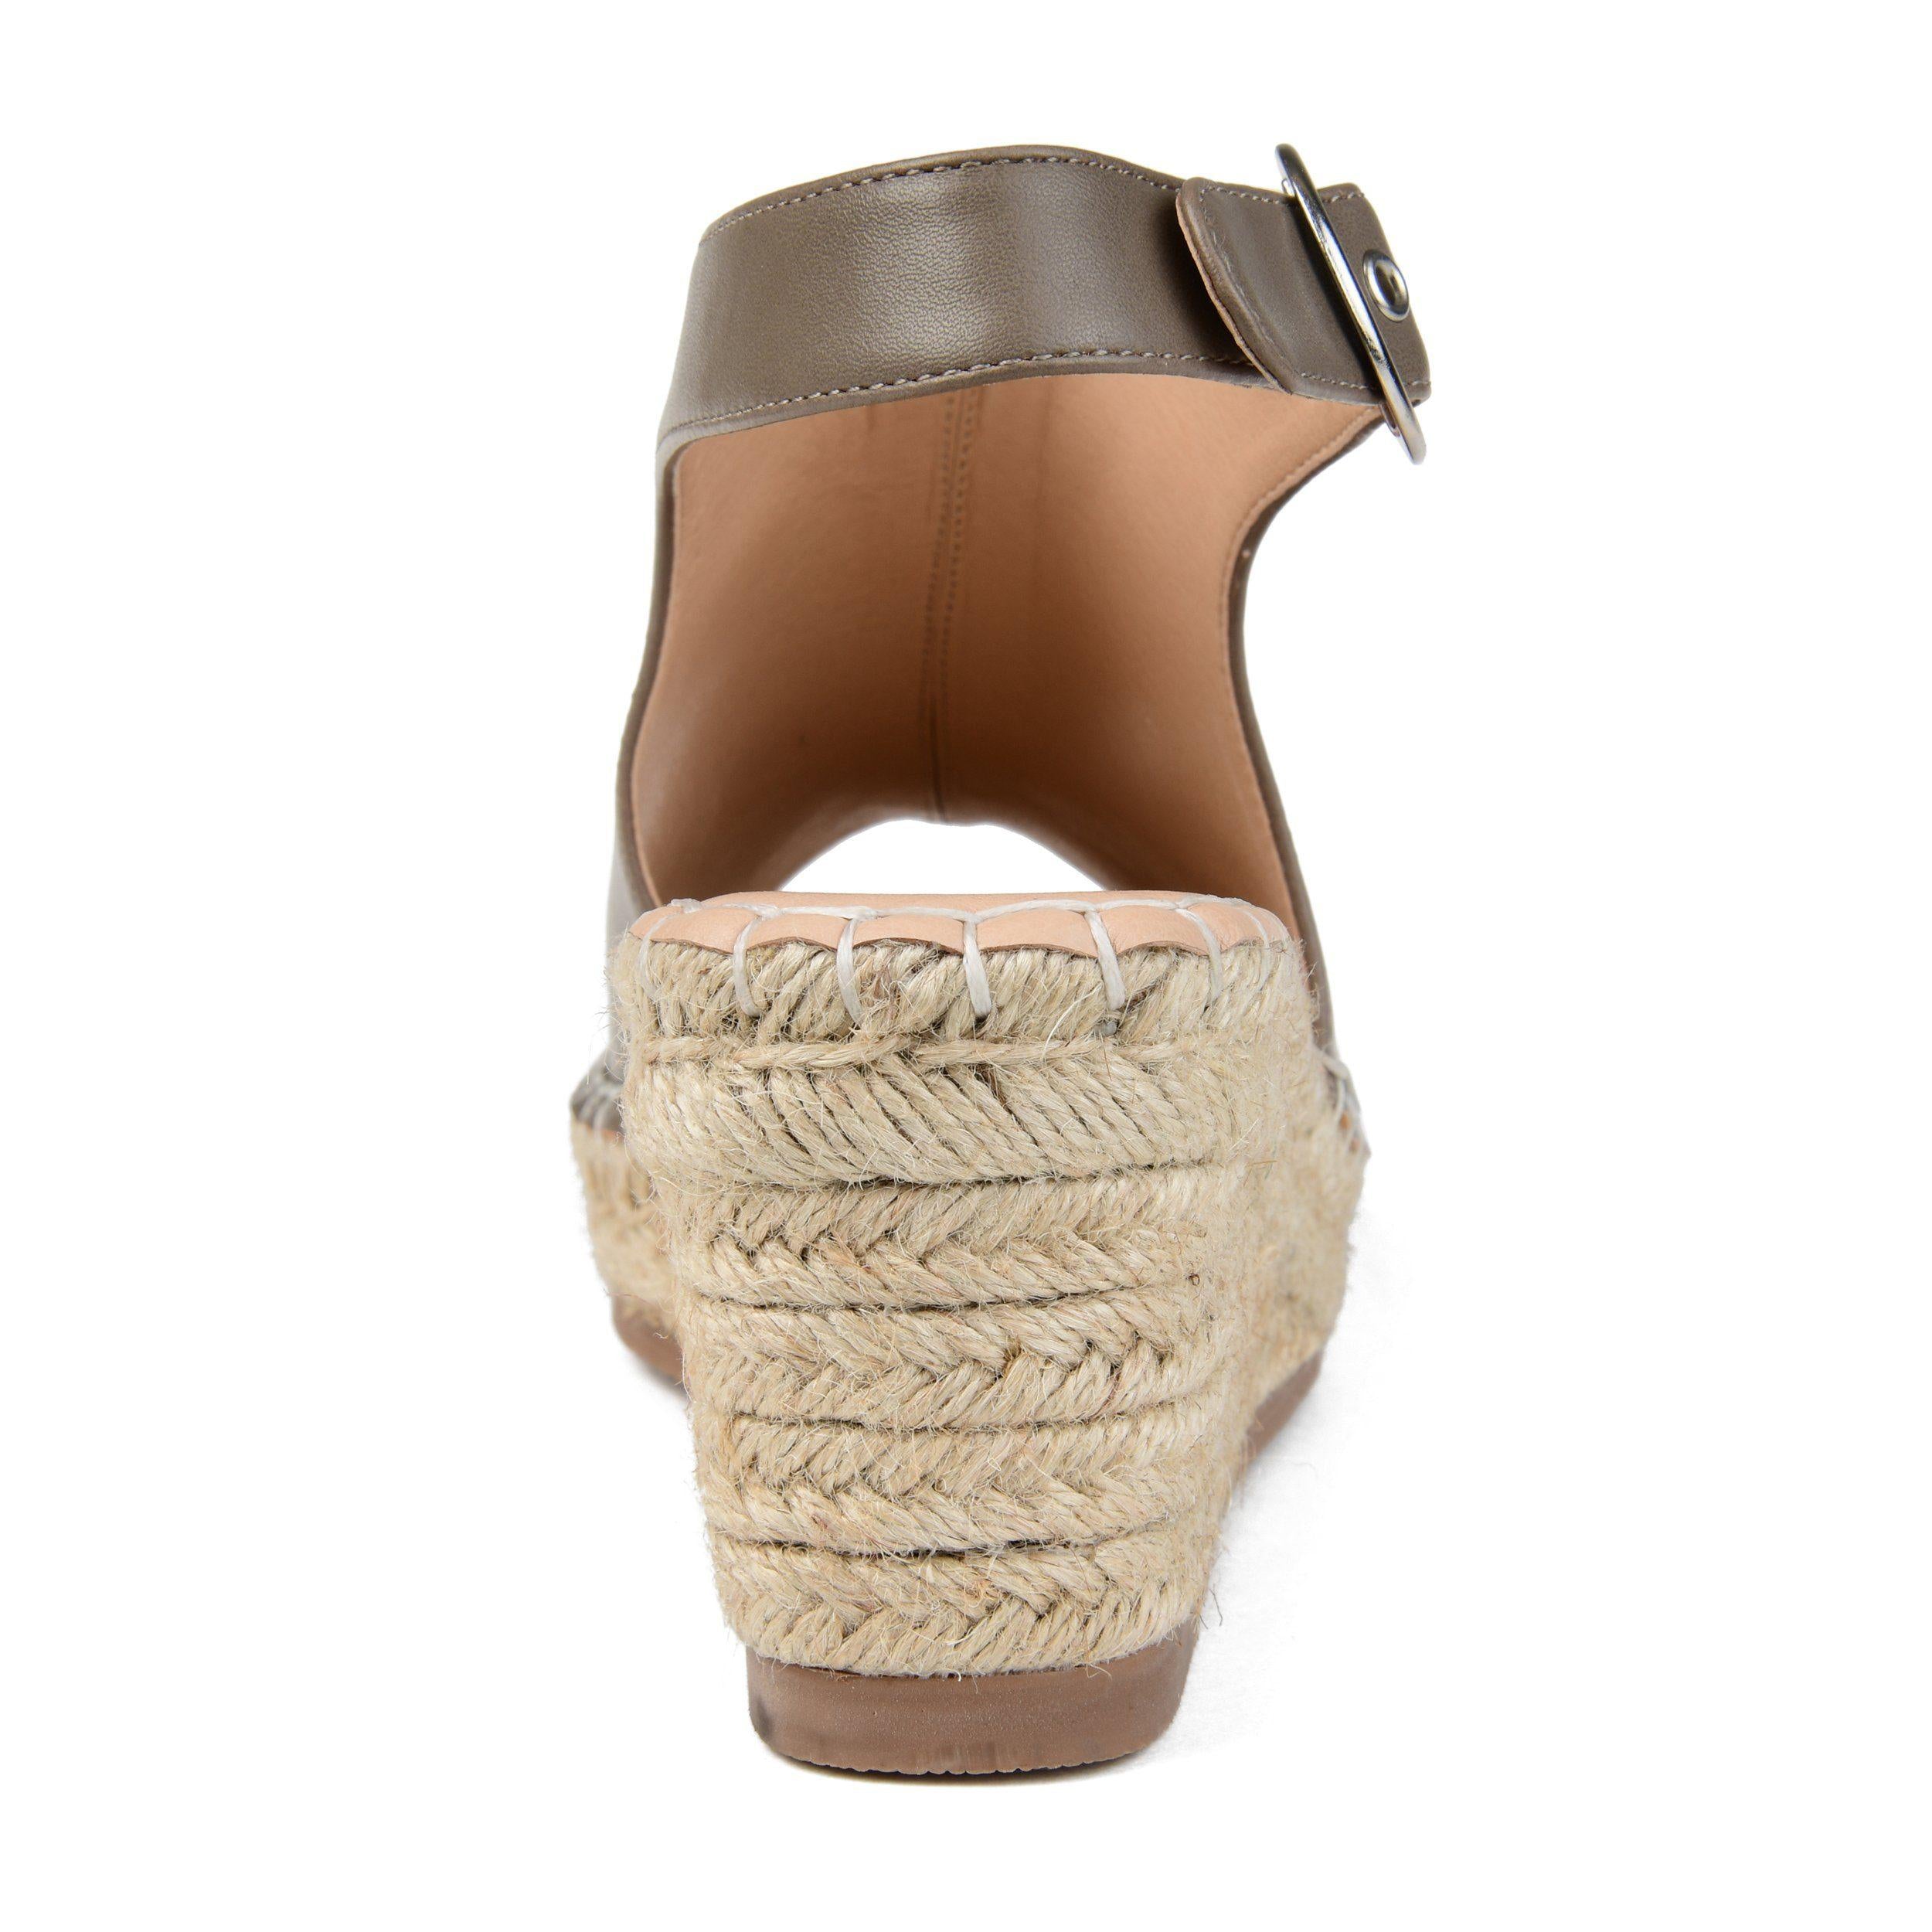 Crew Sandal | Women's Wedged Sandal | Journee Collection